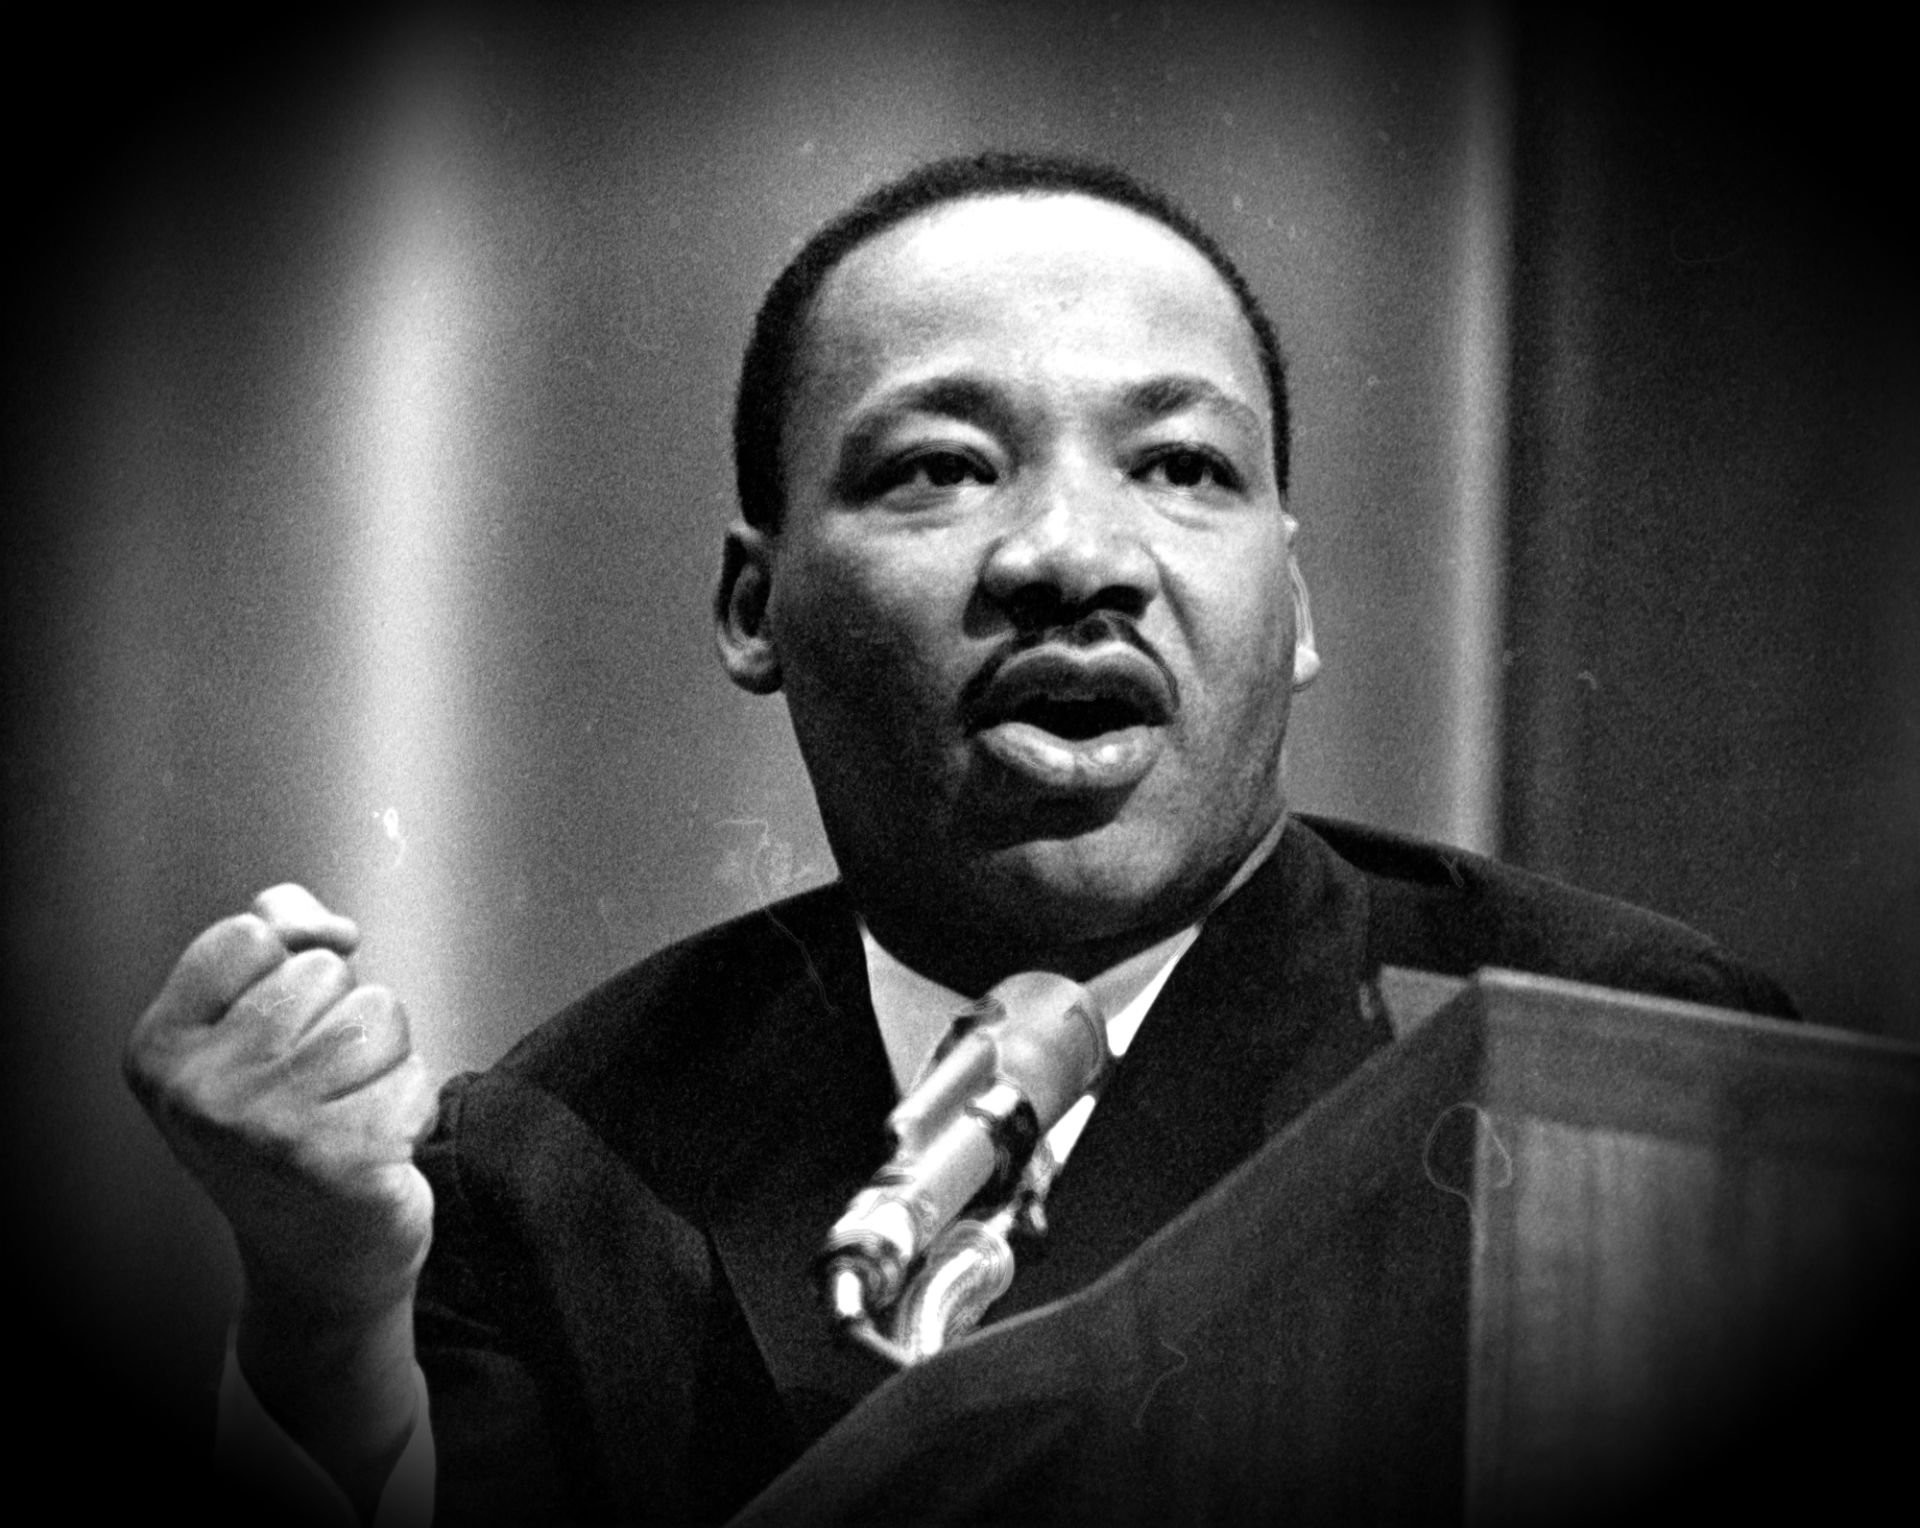 mlk wallpaper,photograph,facial expression,public speaking,photography,gesture